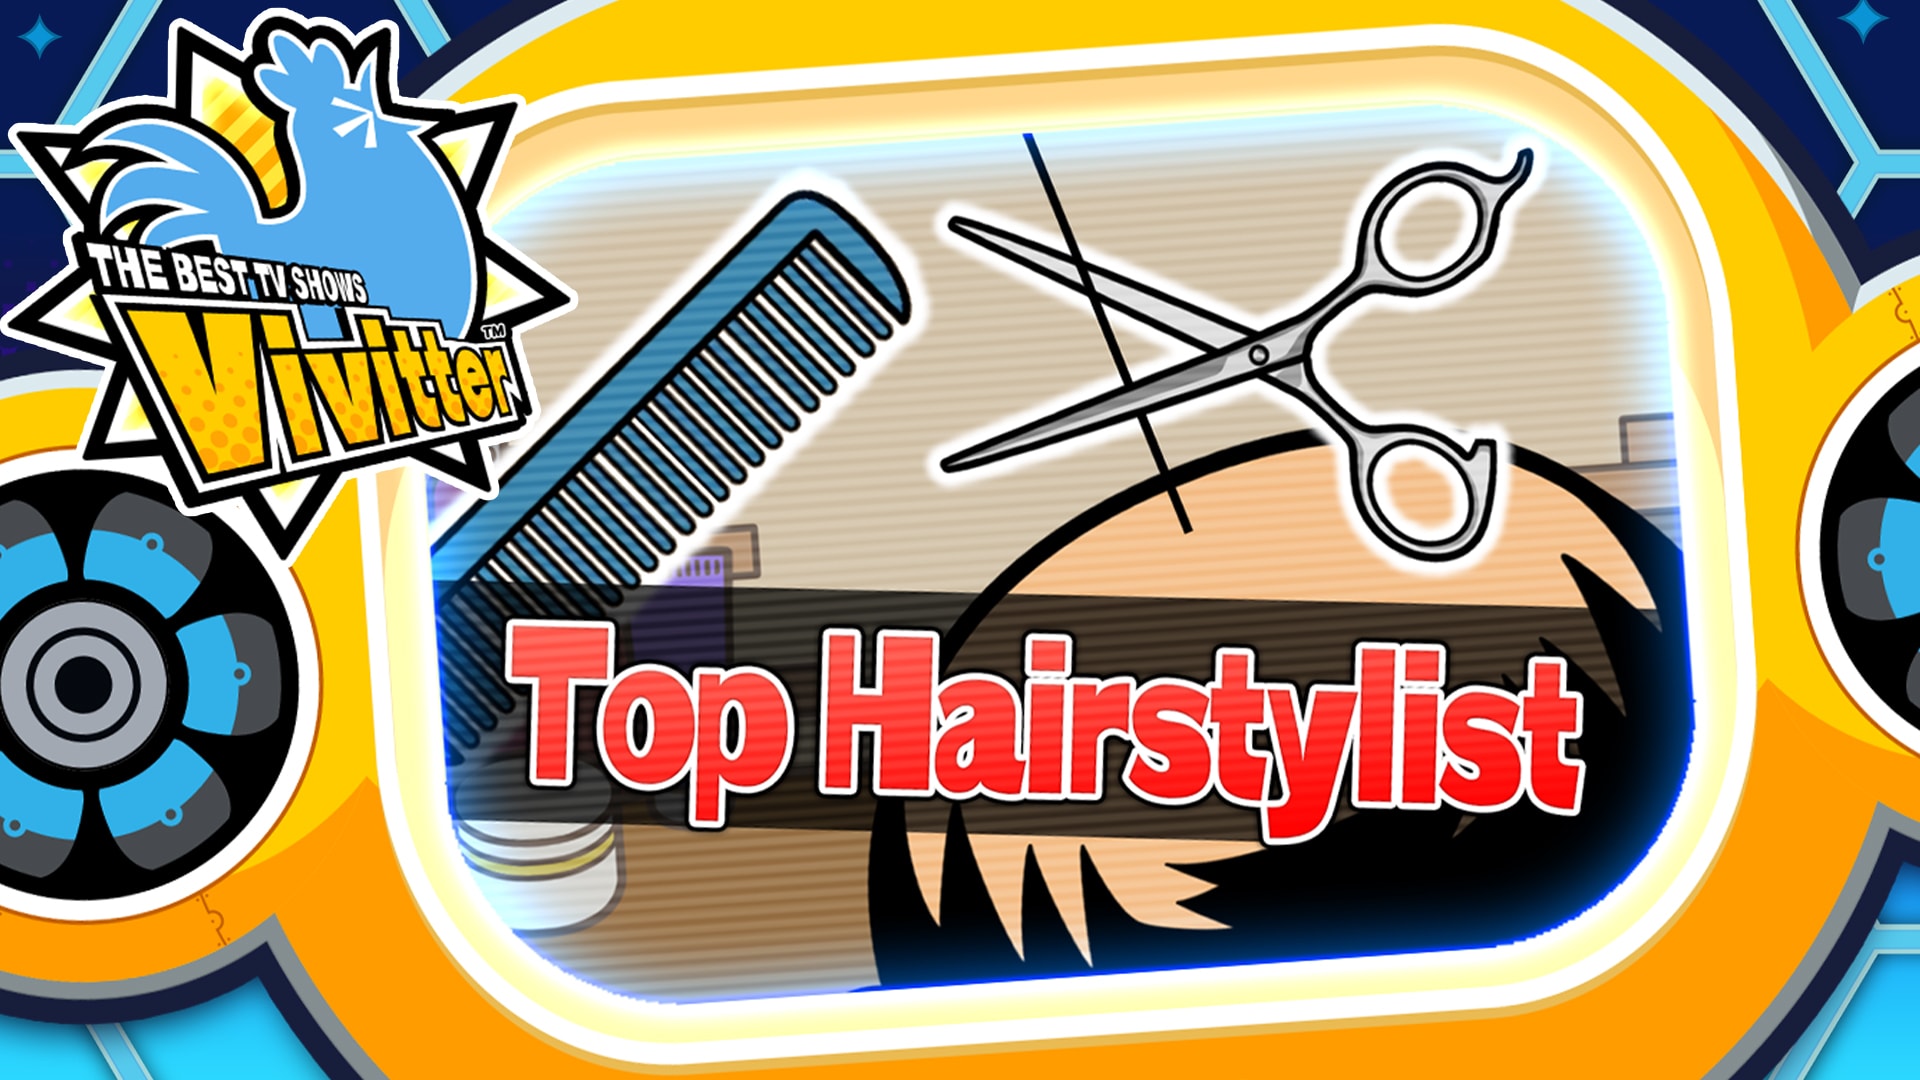 Additional mini-game "Top Hairstylist"